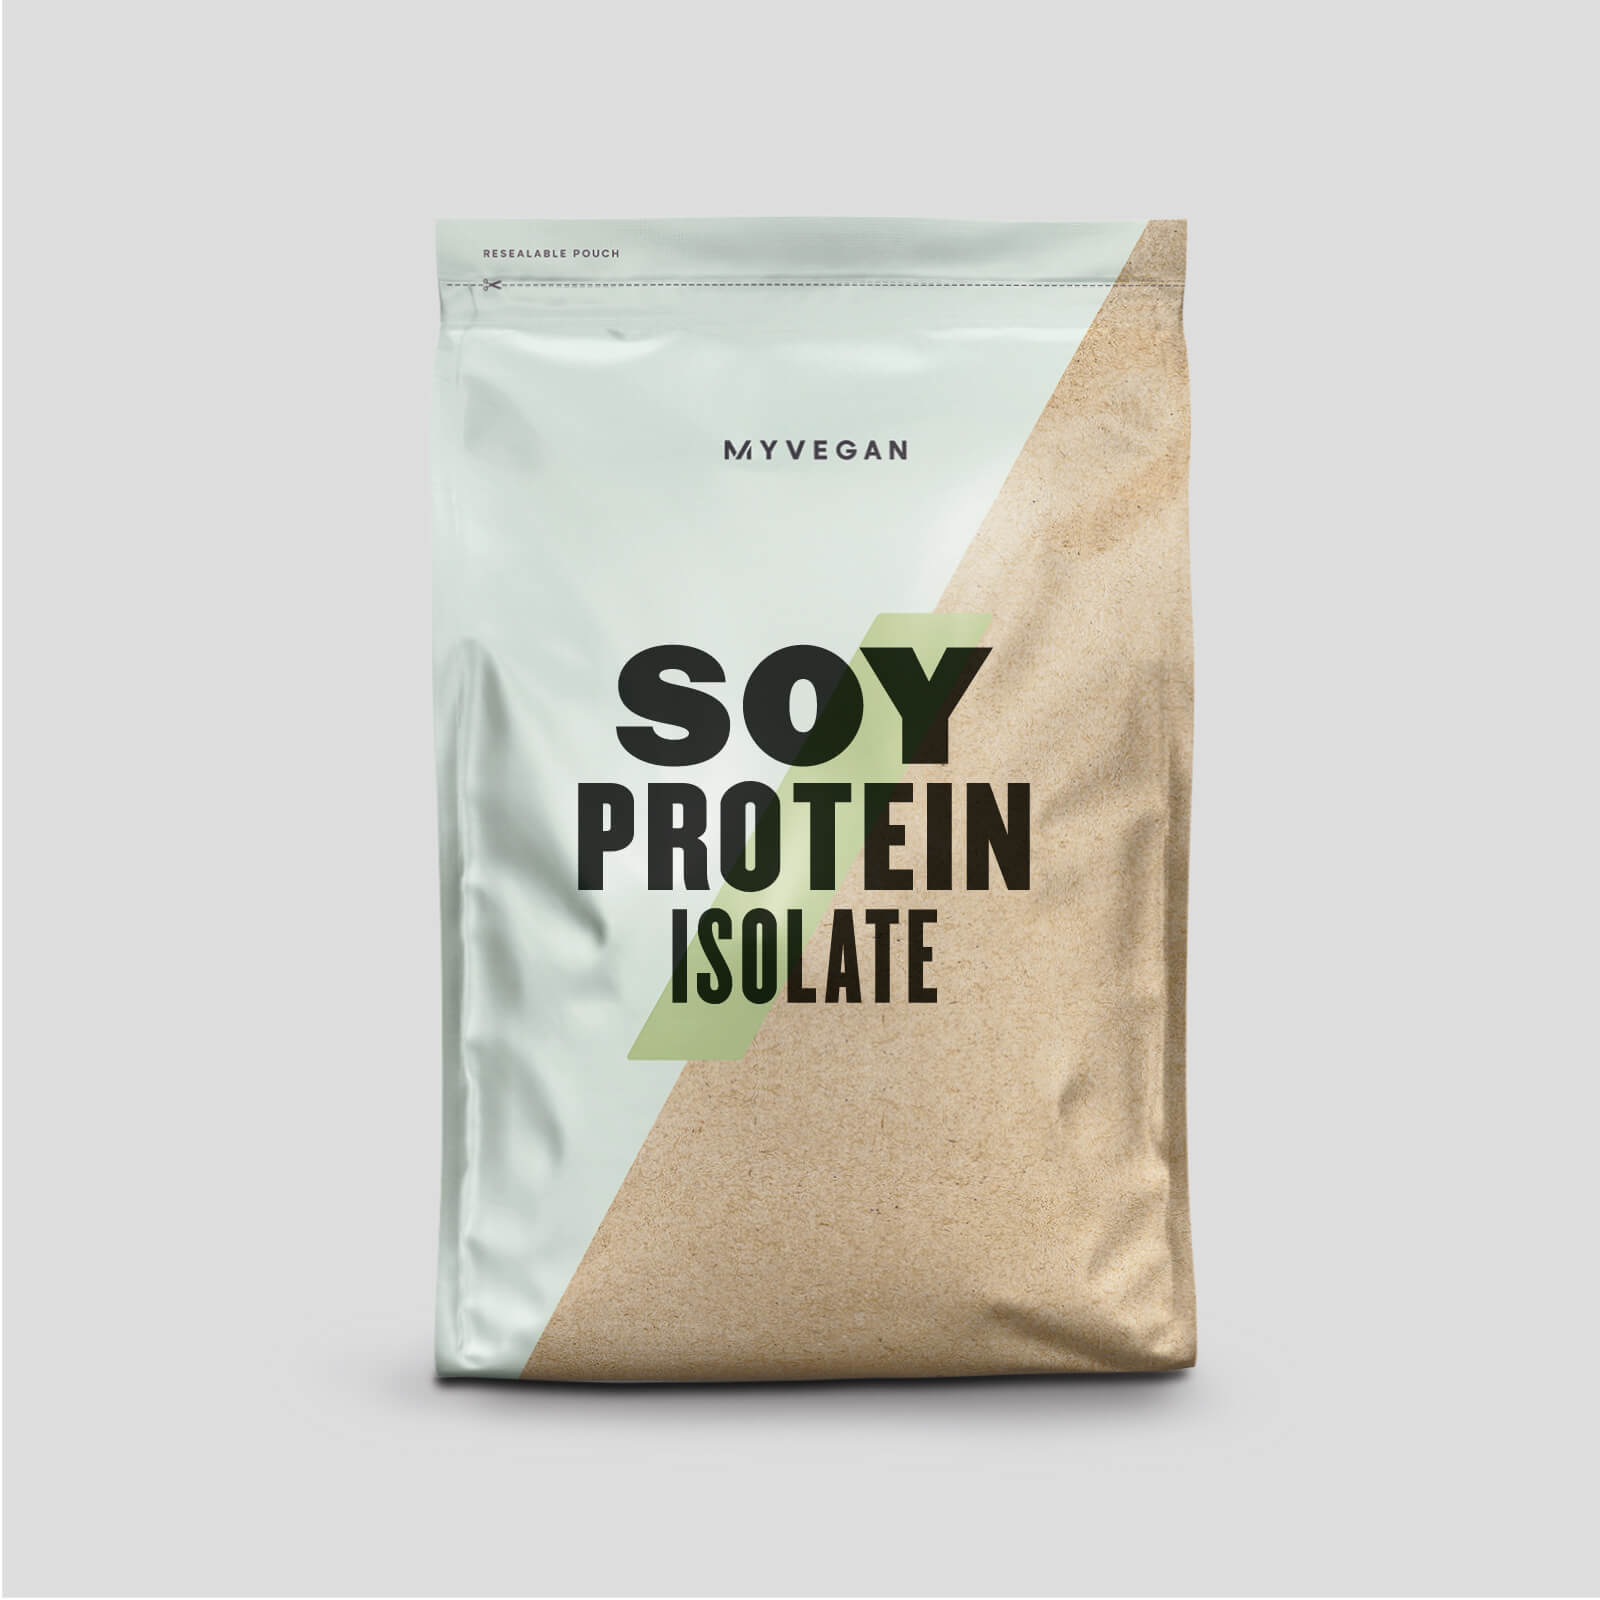 Myprotein Soy Protein Isolate - 500g - Ny - Salted Caramel